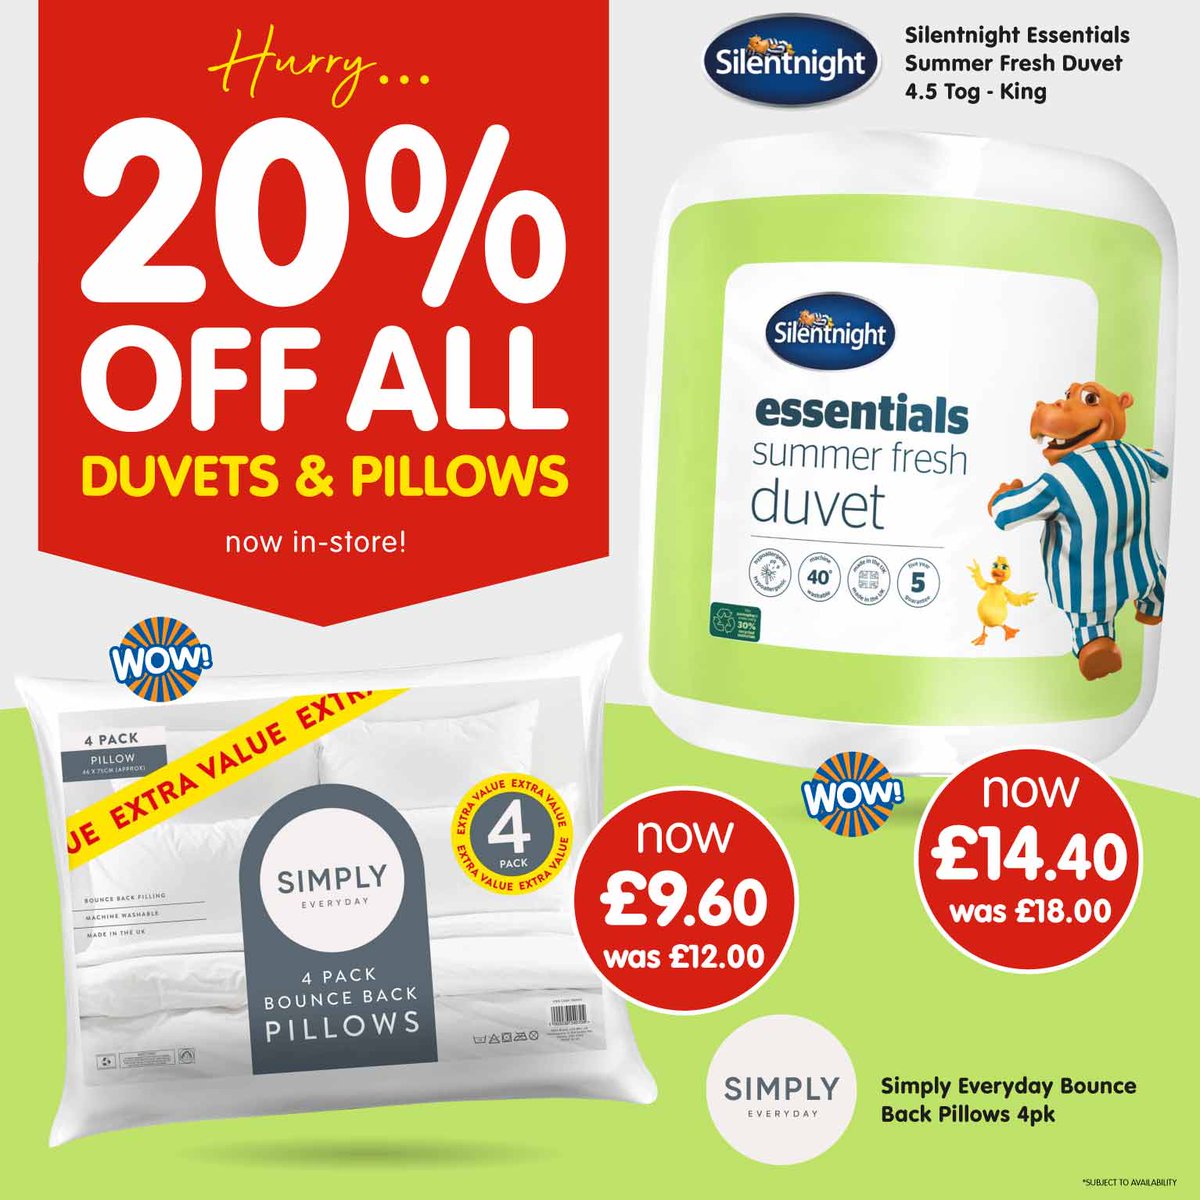 ✨ We've got an incredible 20% off ALL duvets & Pillows, in-store now! ✨ With everything you need for a bedroom refresh for the cooler months, there're savings on Silentnight, Downland and much more🛏️! Who's popping into B&M to grab these before they're gone💖?!